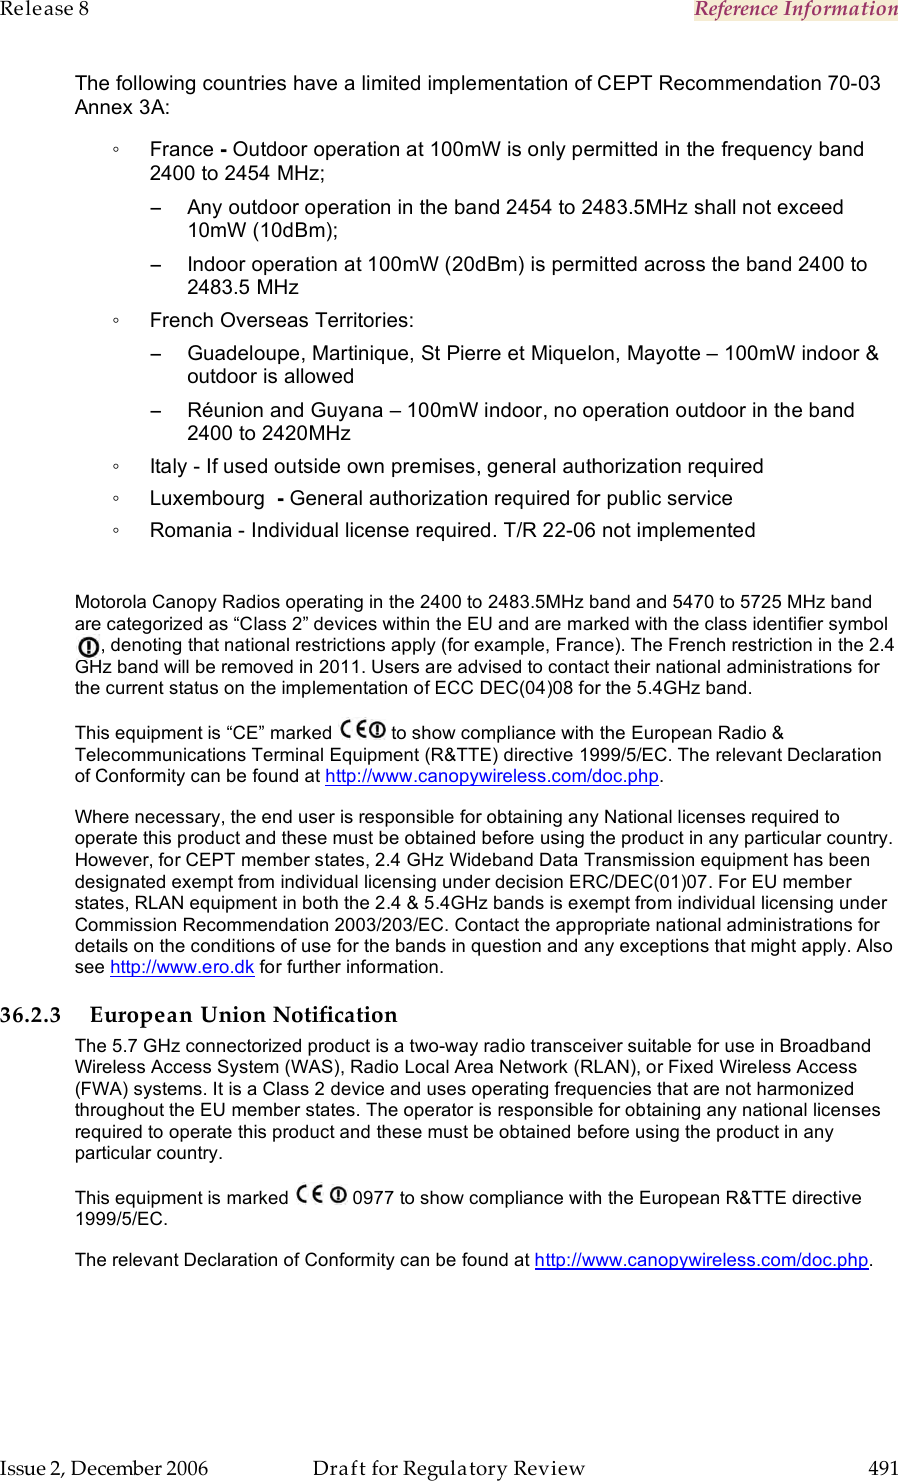 Release 8    Reference Information   Issue 2, December 2006  Draft for Regulatory Review  491     The following countries have a limited implementation of CEPT Recommendation 70-03 Annex 3A: ◦  France - Outdoor operation at 100mW is only permitted in the frequency band 2400 to 2454 MHz; −  Any outdoor operation in the band 2454 to 2483.5MHz shall not exceed 10mW (10dBm); −  Indoor operation at 100mW (20dBm) is permitted across the band 2400 to 2483.5 MHz ◦  French Overseas Territories: −  Guadeloupe, Martinique, St Pierre et Miquelon, Mayotte – 100mW indoor &amp; outdoor is allowed −  Réunion and Guyana – 100mW indoor, no operation outdoor in the band 2400 to 2420MHz ◦  Italy - If used outside own premises, general authorization required ◦  Luxembourg  - General authorization required for public service ◦  Romania - Individual license required. T/R 22-06 not implemented  Motorola Canopy Radios operating in the 2400 to 2483.5MHz band and 5470 to 5725 MHz band are categorized as “Class 2” devices within the EU and are marked with the class identifier symbol          , denoting that national restrictions apply (for example, France). The French restriction in the 2.4 GHz band will be removed in 2011. Users are advised to contact their national administrations for the current status on the implementation of ECC DEC(04)08 for the 5.4GHz band. This equipment is “CE” marked   to show compliance with the European Radio &amp; Telecommunications Terminal Equipment (R&amp;TTE) directive 1999/5/EC. The relevant Declaration of Conformity can be found at http://www.canopywireless.com/doc.php. Where necessary, the end user is responsible for obtaining any National licenses required to operate this product and these must be obtained before using the product in any particular country. However, for CEPT member states, 2.4 GHz Wideband Data Transmission equipment has been designated exempt from individual licensing under decision ERC/DEC(01)07. For EU member states, RLAN equipment in both the 2.4 &amp; 5.4GHz bands is exempt from individual licensing under Commission Recommendation 2003/203/EC. Contact the appropriate national administrations for details on the conditions of use for the bands in question and any exceptions that might apply. Also see http://www.ero.dk for further information.  36.2.3 European Union Notification The 5.7 GHz connectorized product is a two-way radio transceiver suitable for use in Broadband Wireless Access System (WAS), Radio Local Area Network (RLAN), or Fixed Wireless Access (FWA) systems. It is a Class 2 device and uses operating frequencies that are not harmonized throughout the EU member states. The operator is responsible for obtaining any national licenses required to operate this product and these must be obtained before using the product in any particular country. This equipment is marked     0977 to show compliance with the European R&amp;TTE directive 1999/5/EC. The relevant Declaration of Conformity can be found at http://www.canopywireless.com/doc.php. 